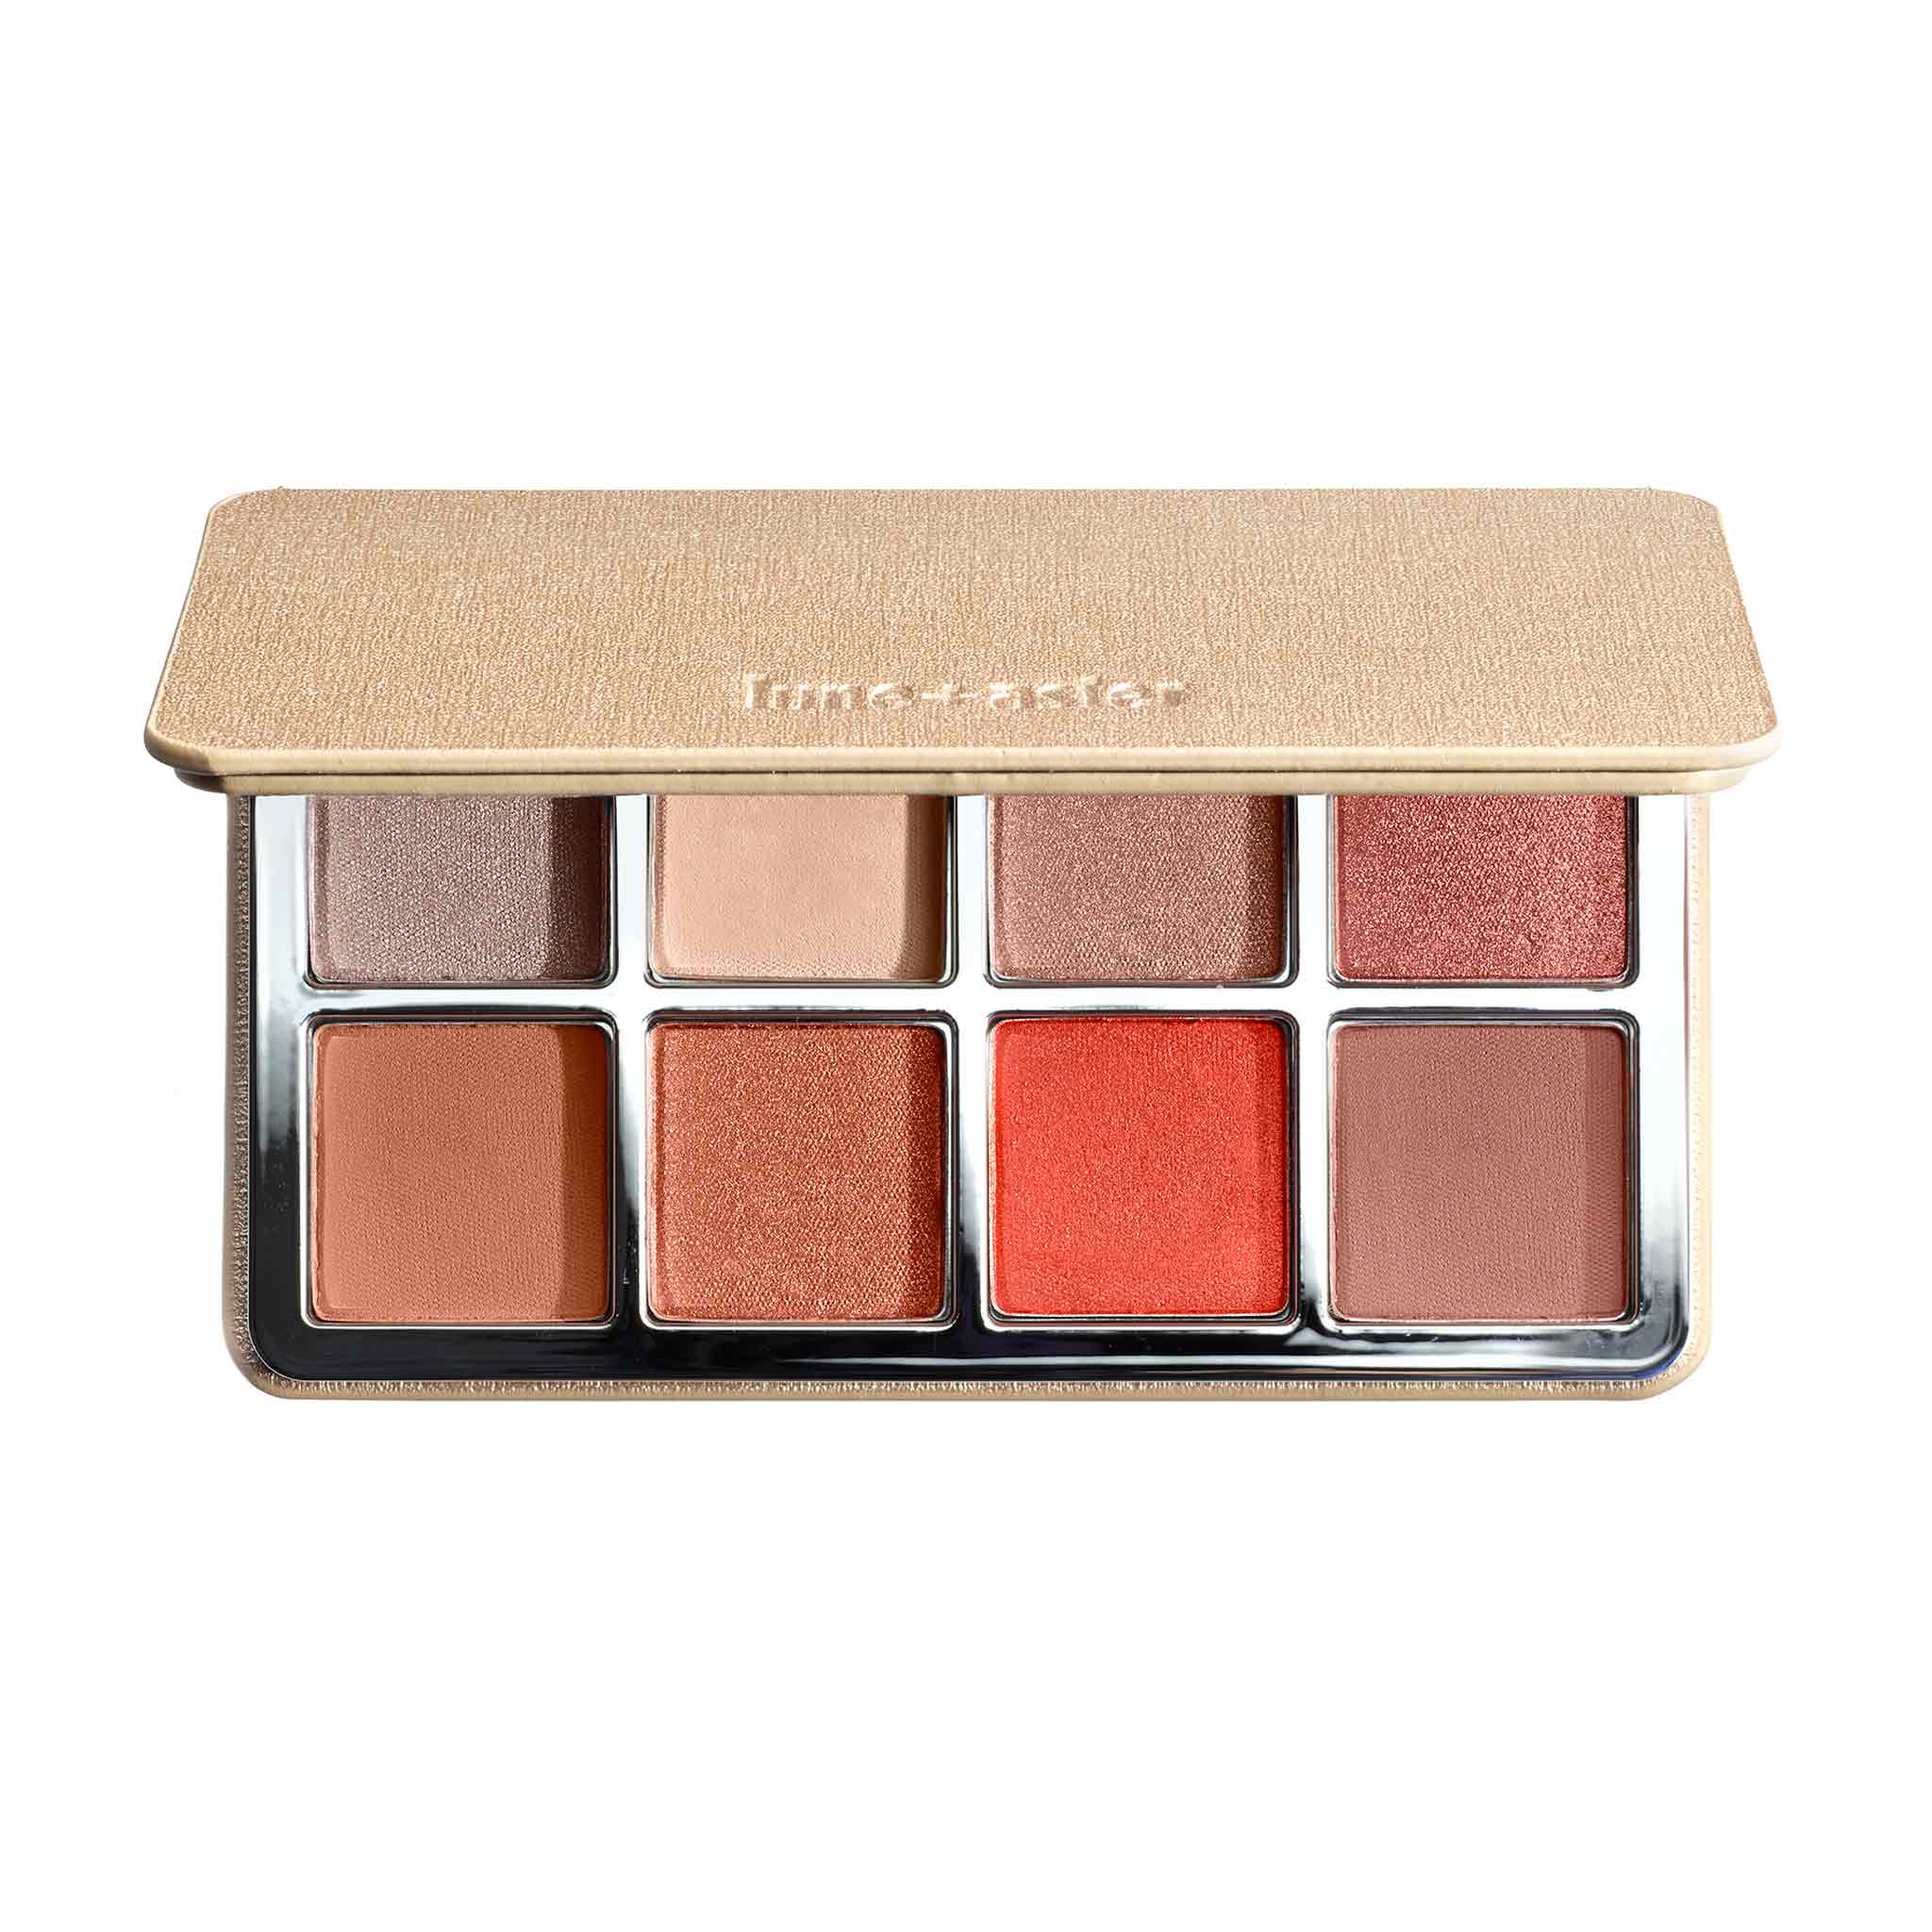 Lune+Aster Sunstone Eyeshadow Palette main image. This product is in the color bronze